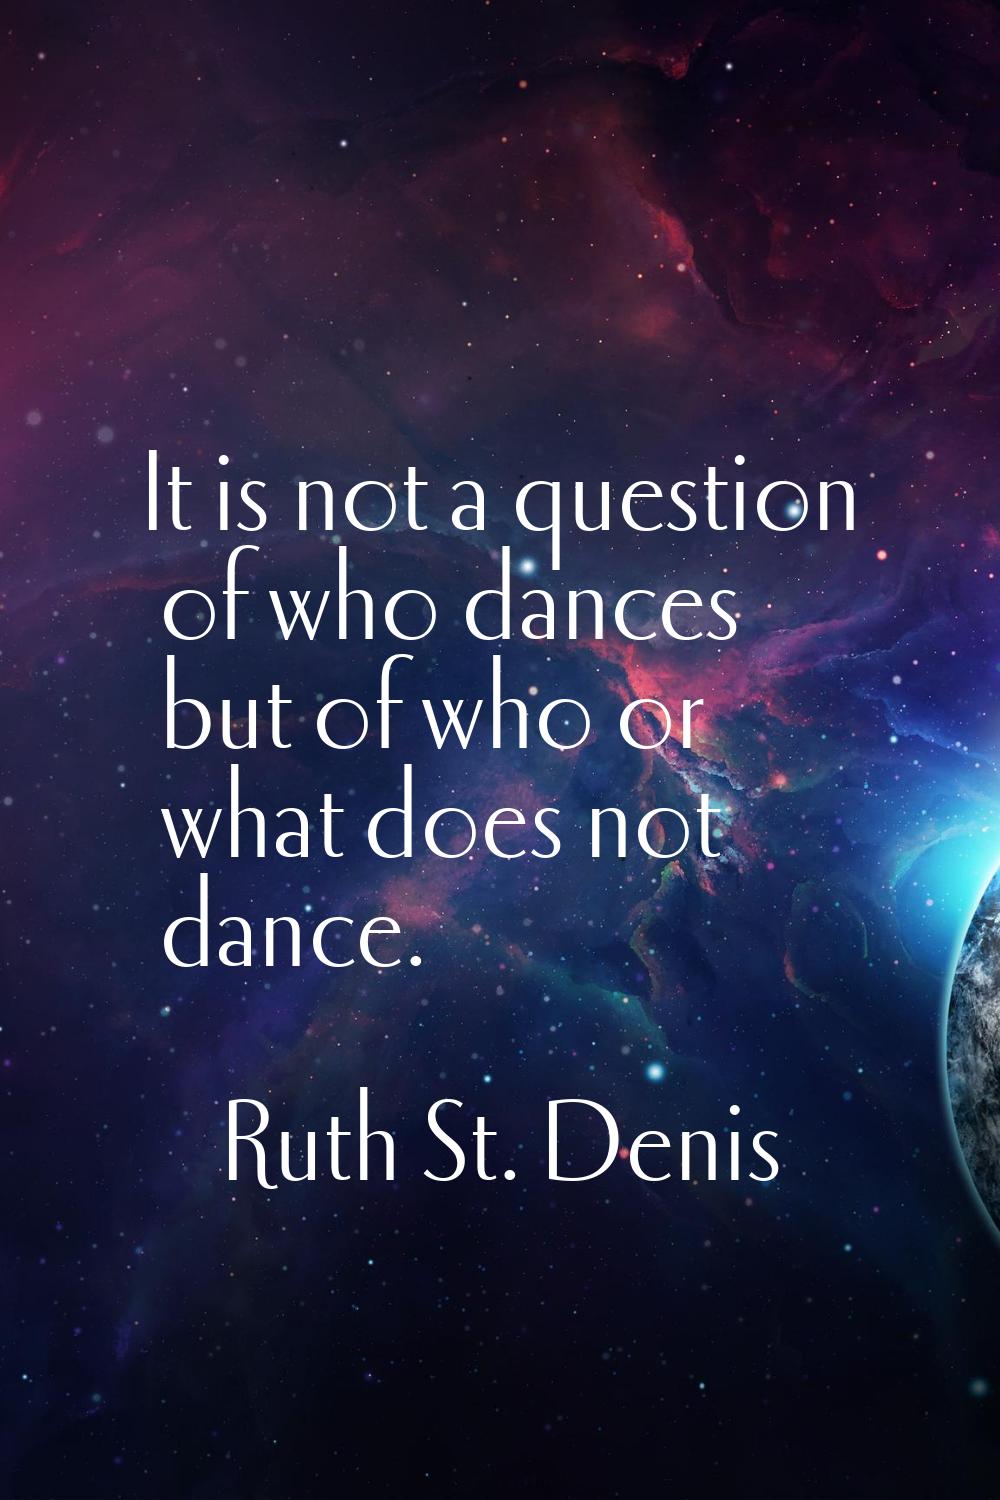 It is not a question of who dances but of who or what does not dance.